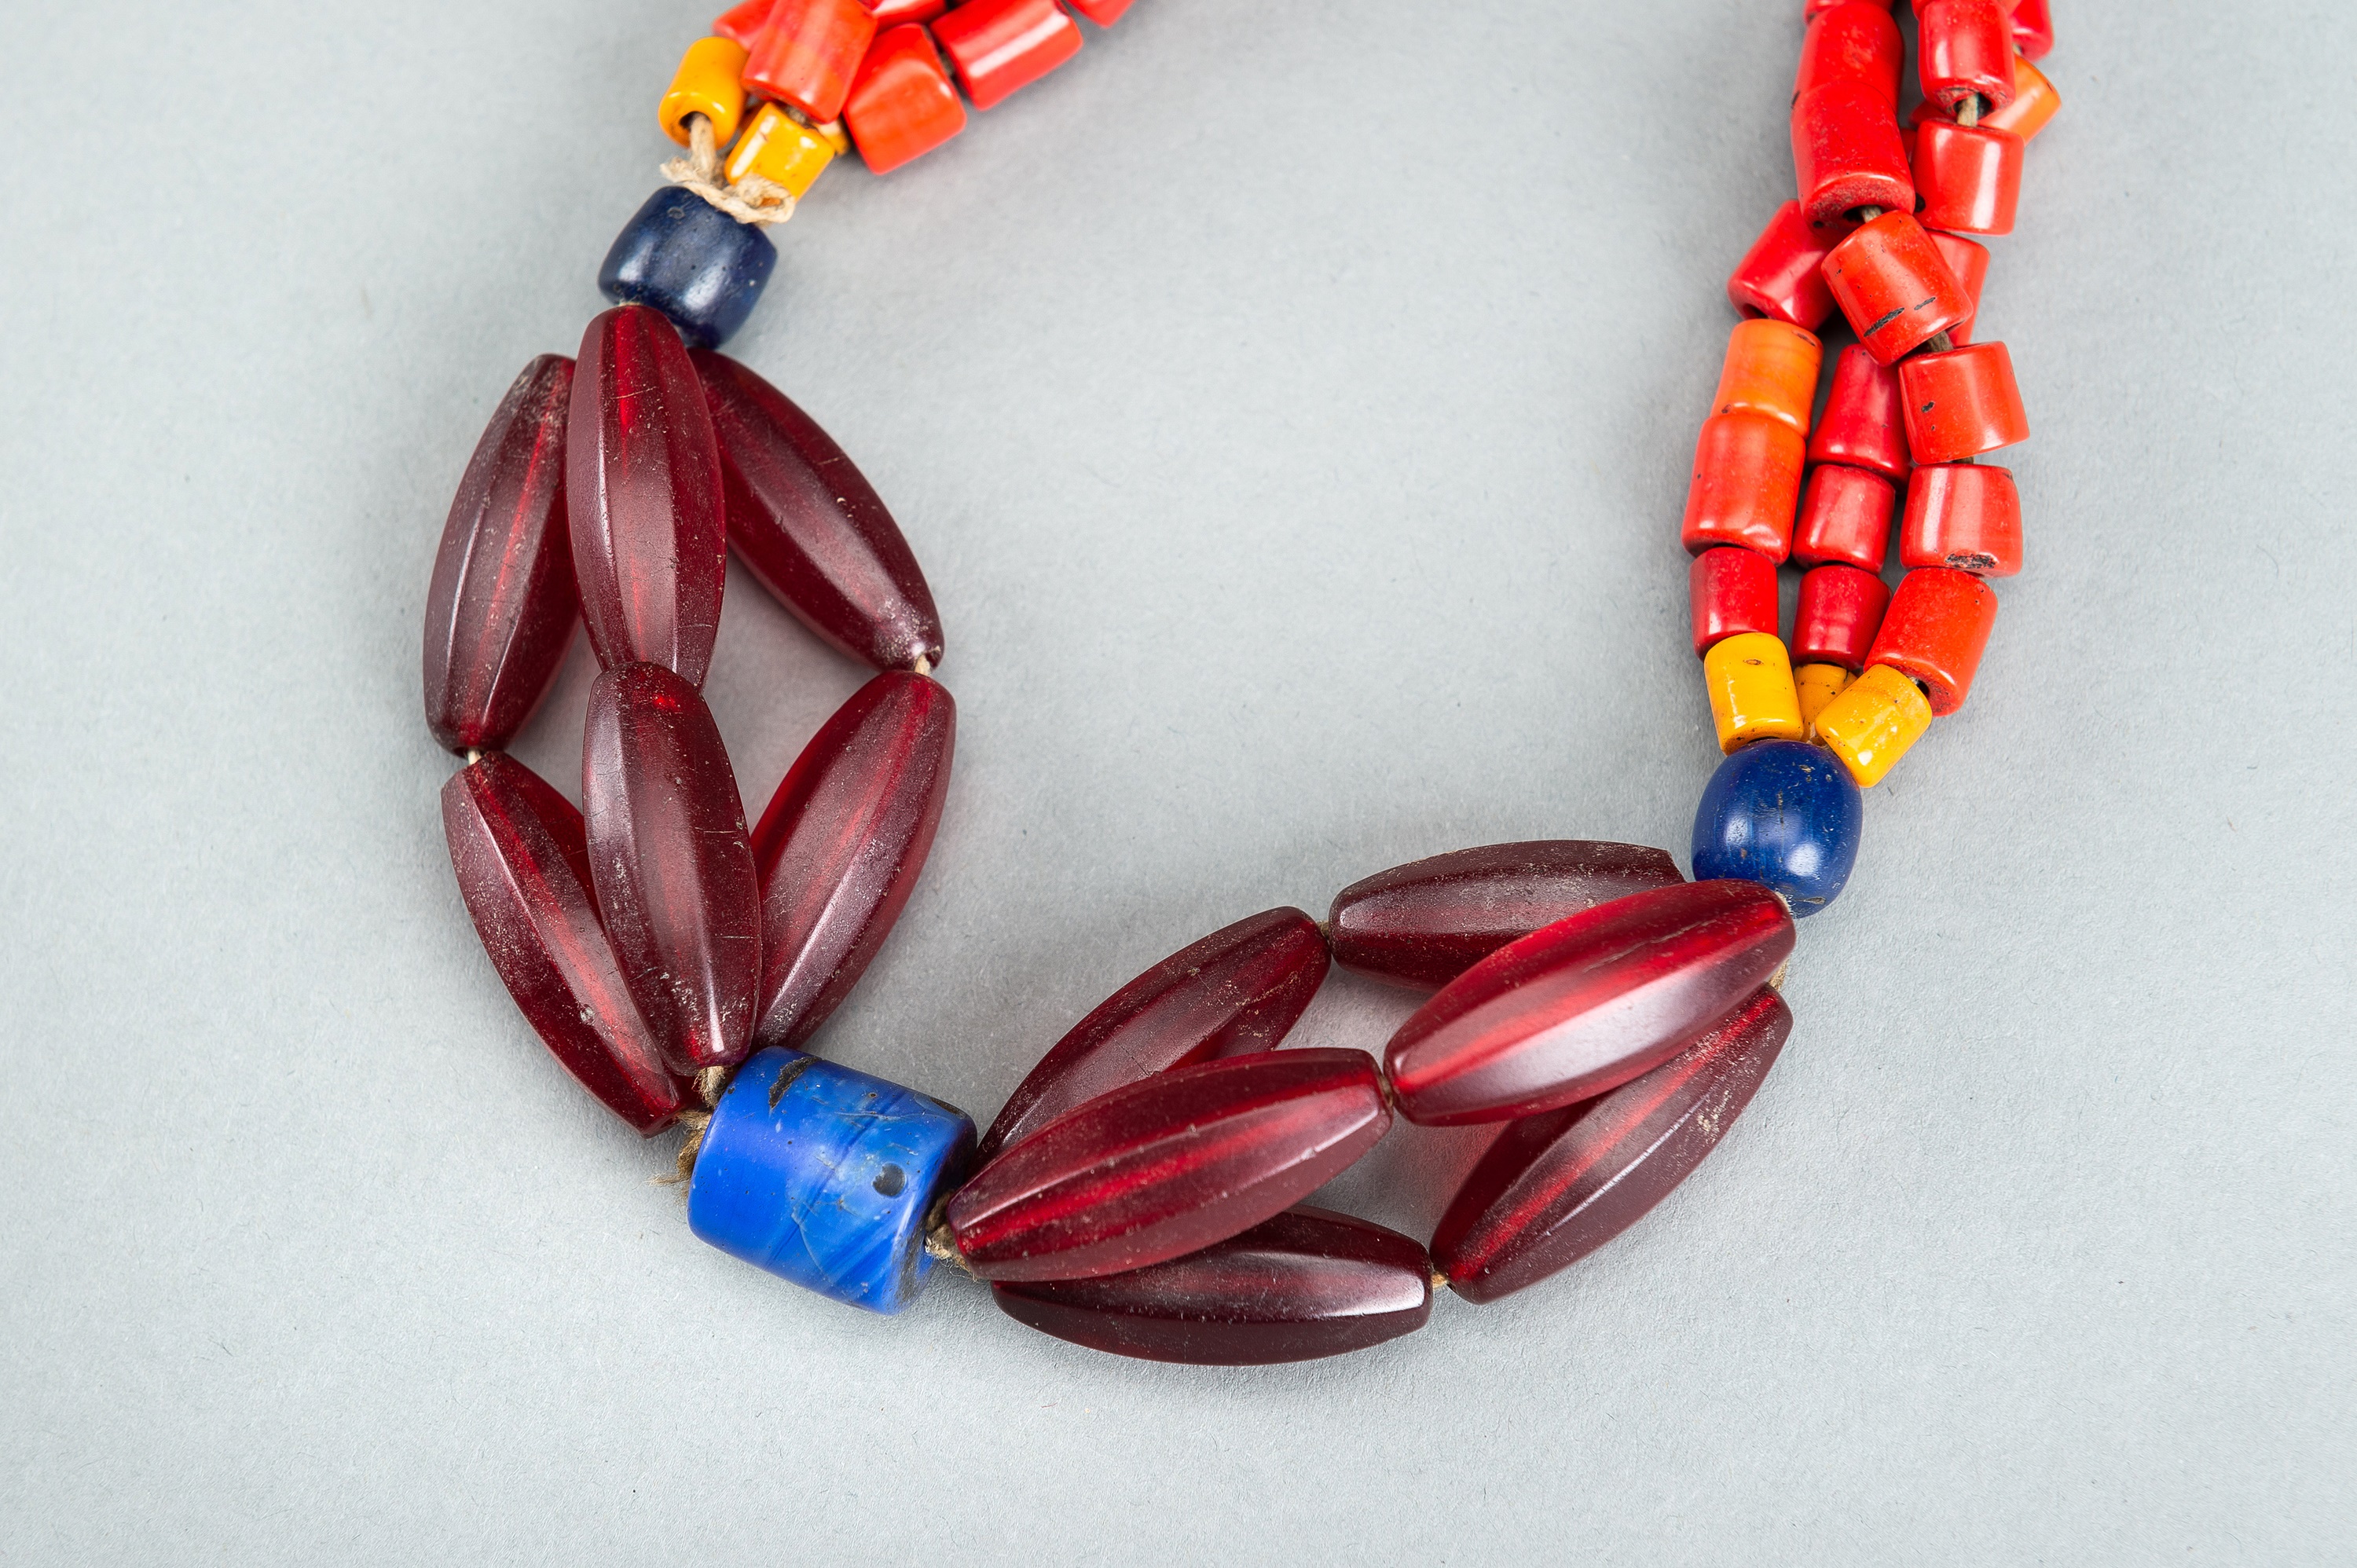 A NAGALAND MULTI-COLORED GLASS NECKLACE, c. 1900s - Image 2 of 9